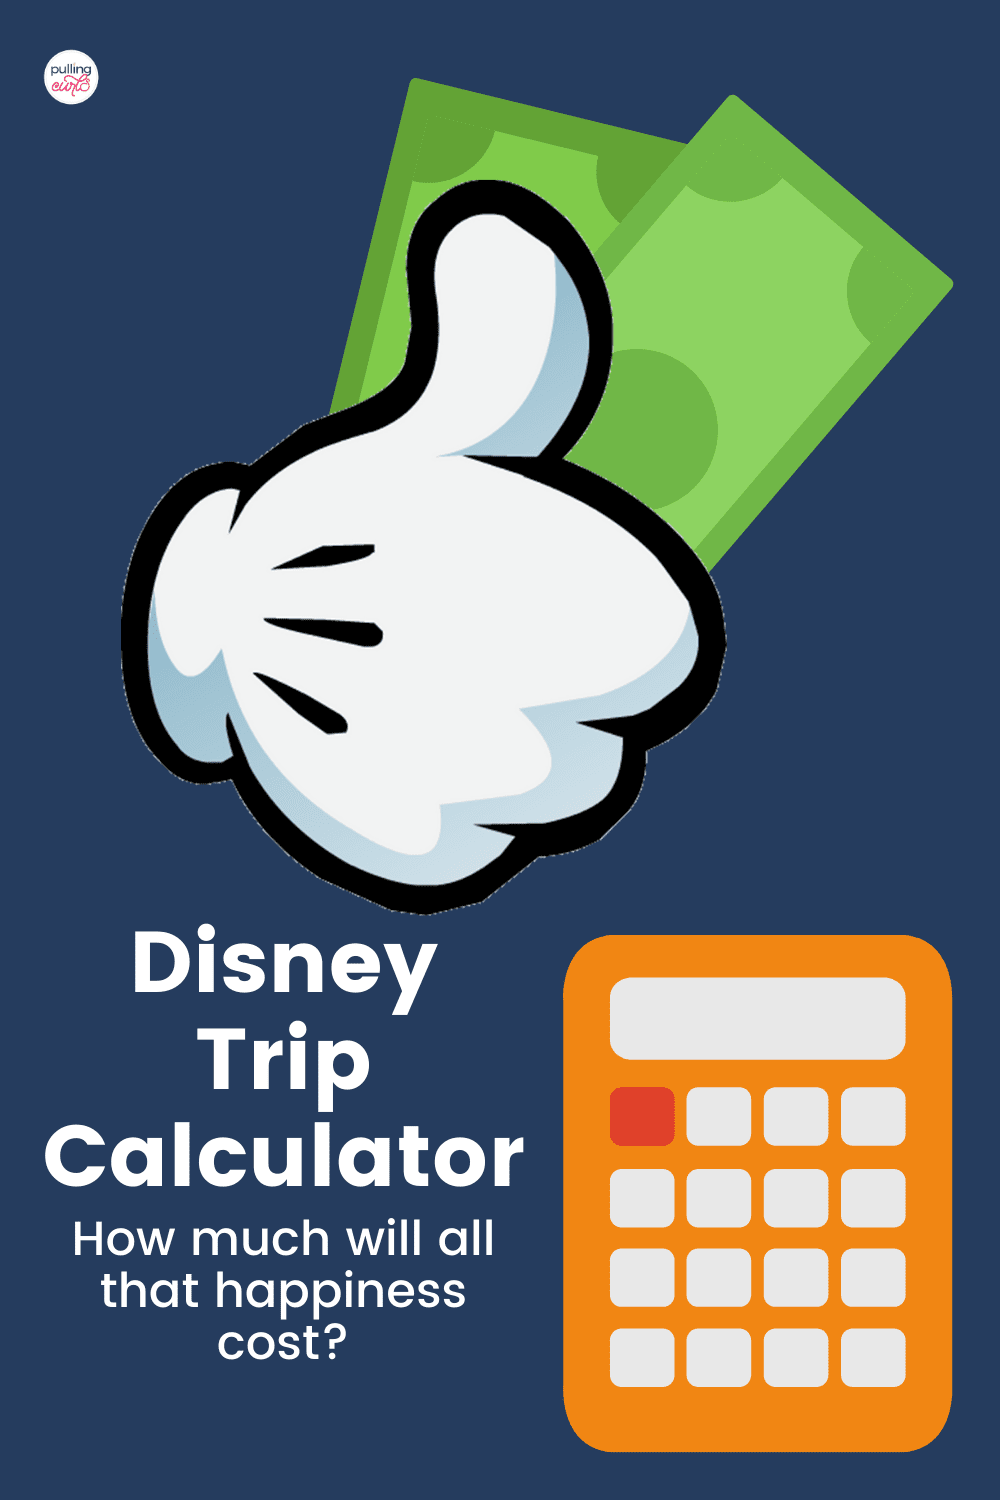 Today we're going to talk about how much will your Disneyland vacation cost? -- This Disneyland Trip Calculator is set to help you make it magical. This Free Trip Calculator can help you plan ANY trip (but also has some great Disneyland budget travel tips). via @pullingcurls